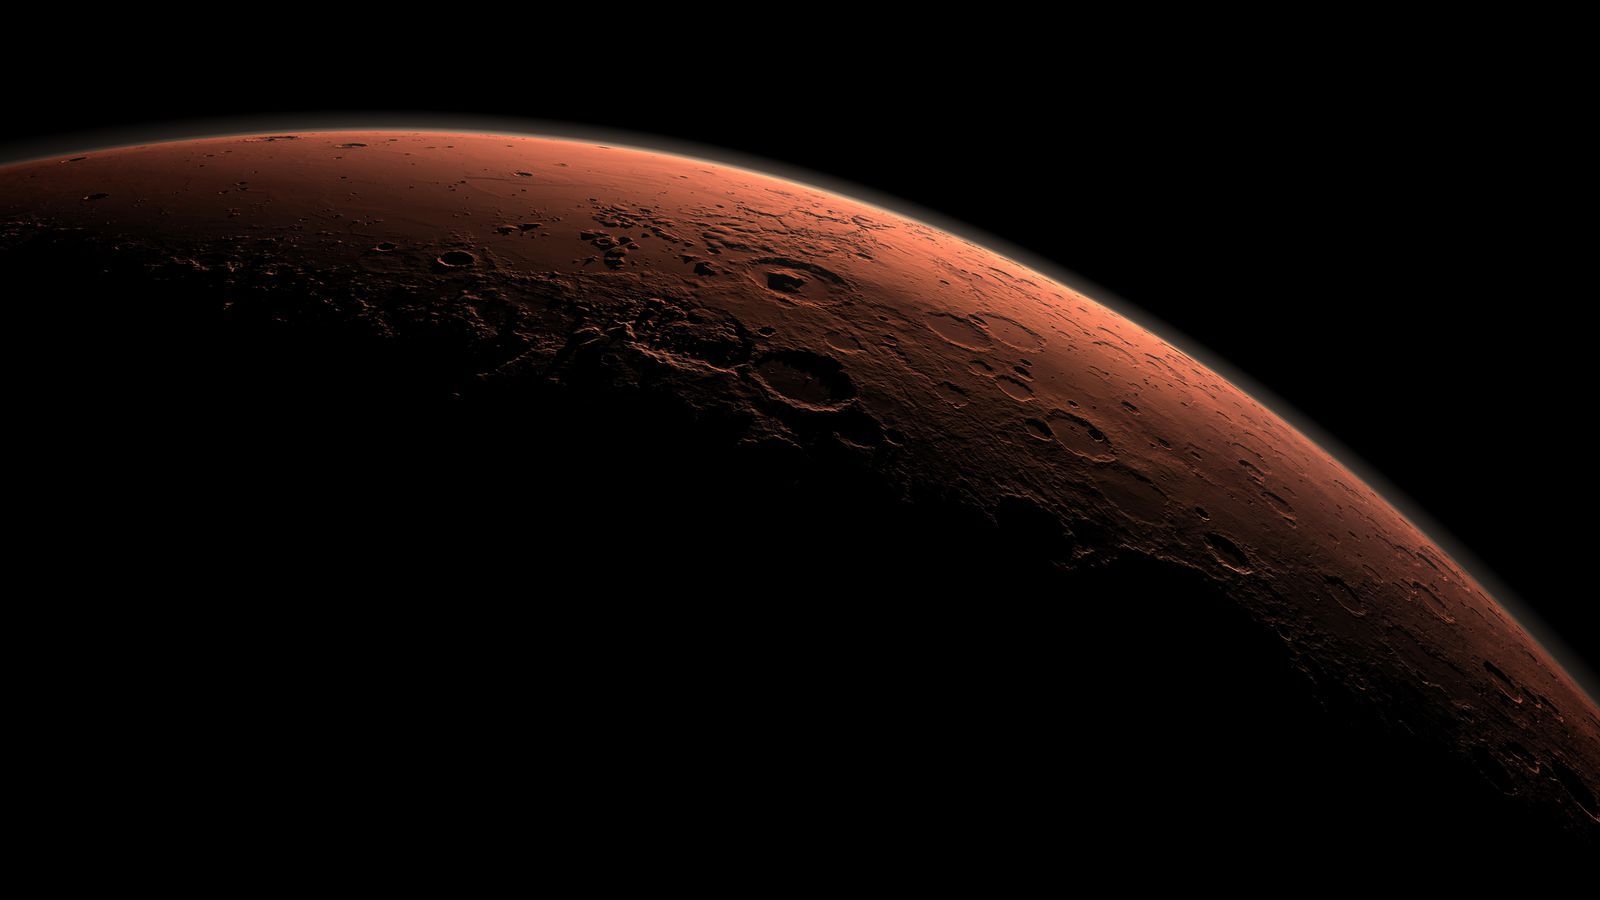 Want To Make Mars Livable? Bring Back Its Magnetic Field. Daily Planet. Air & Space Magazine